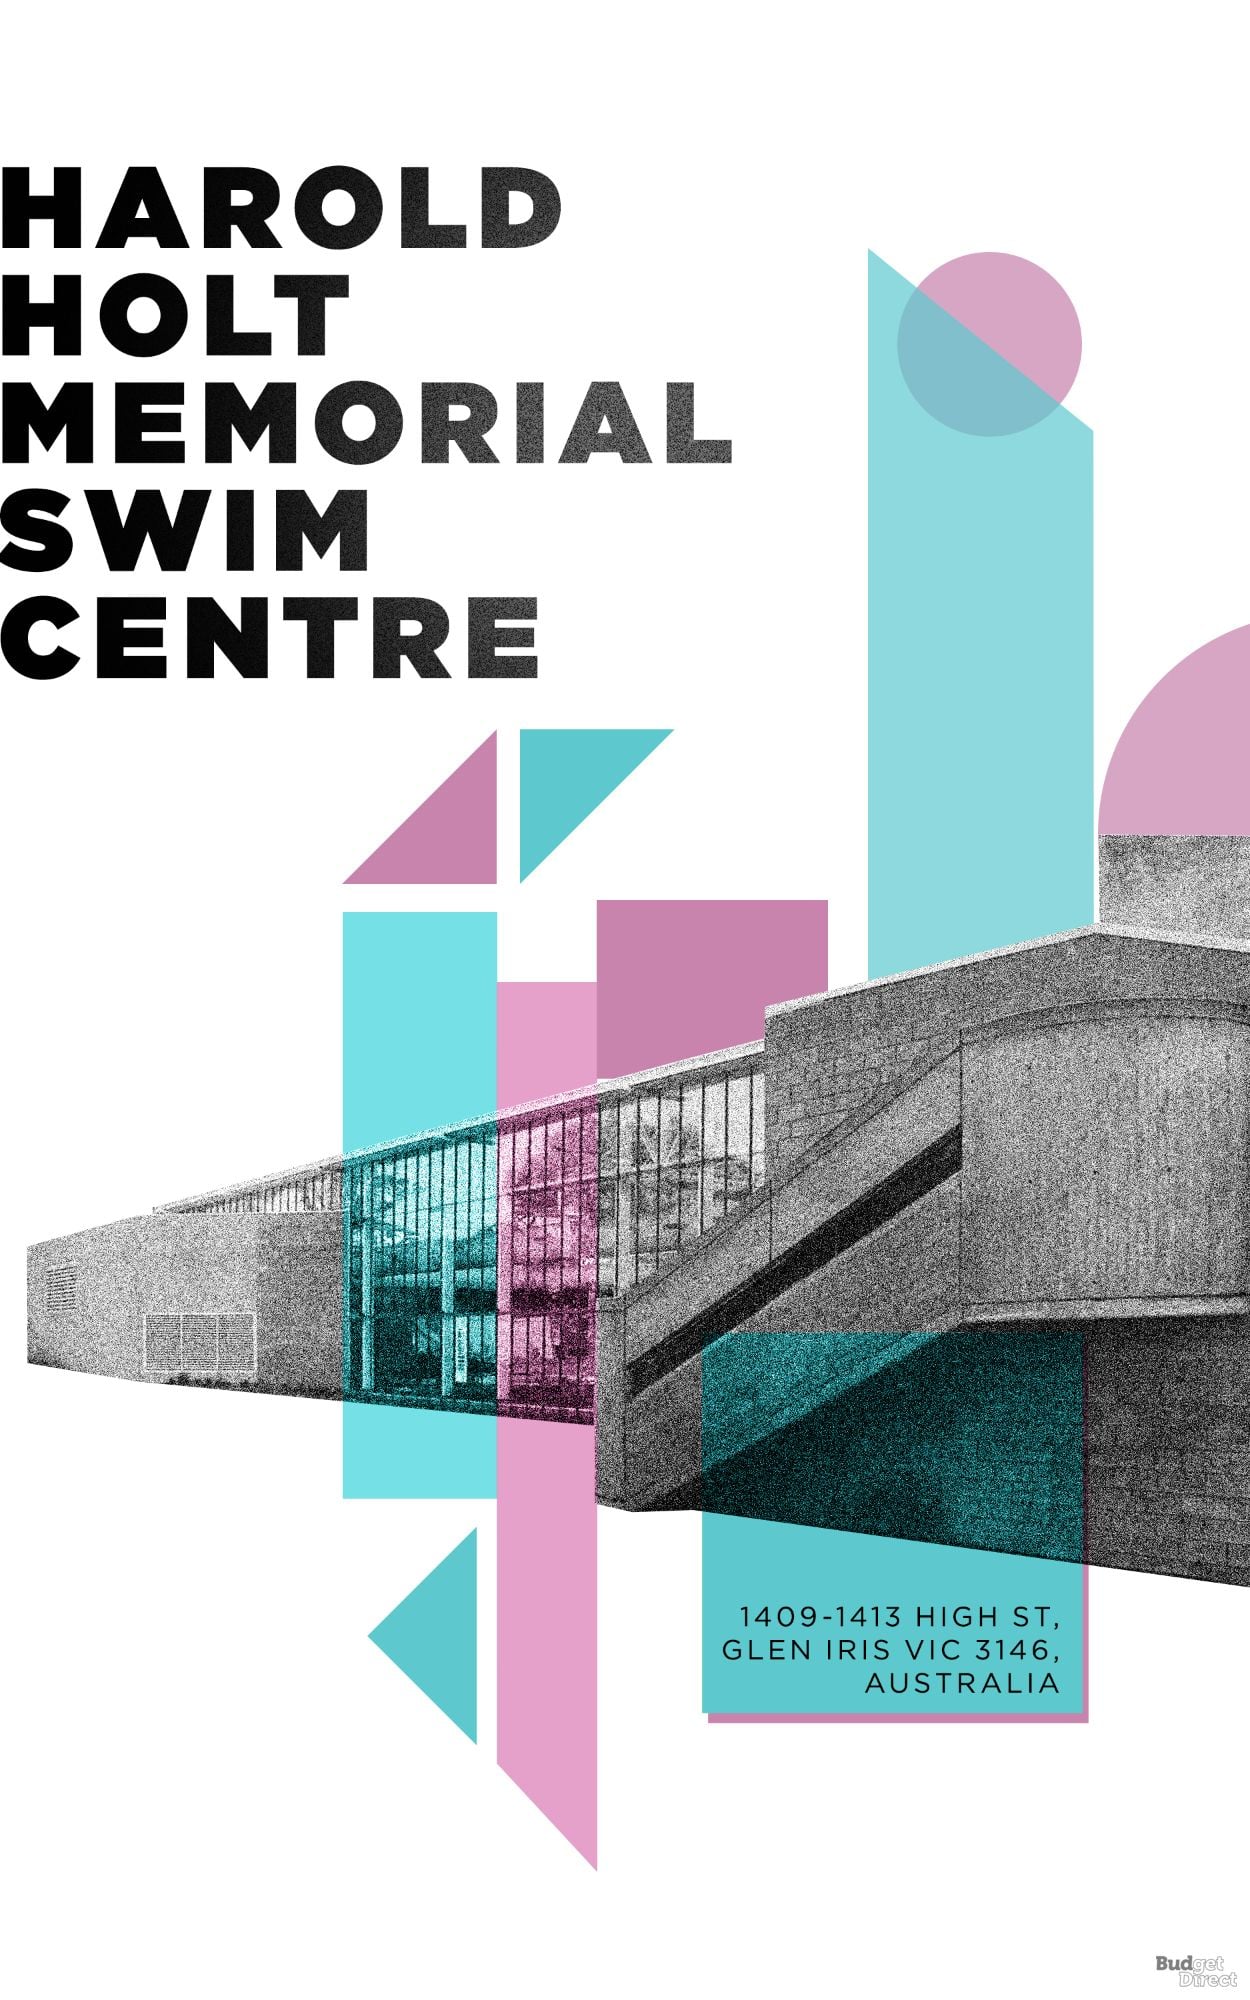 Graphic Harold Holt Memorial Swim Centre poster by Budget Direct Ravel Insurance, made specially for their tribute to Australian Brutalism. 